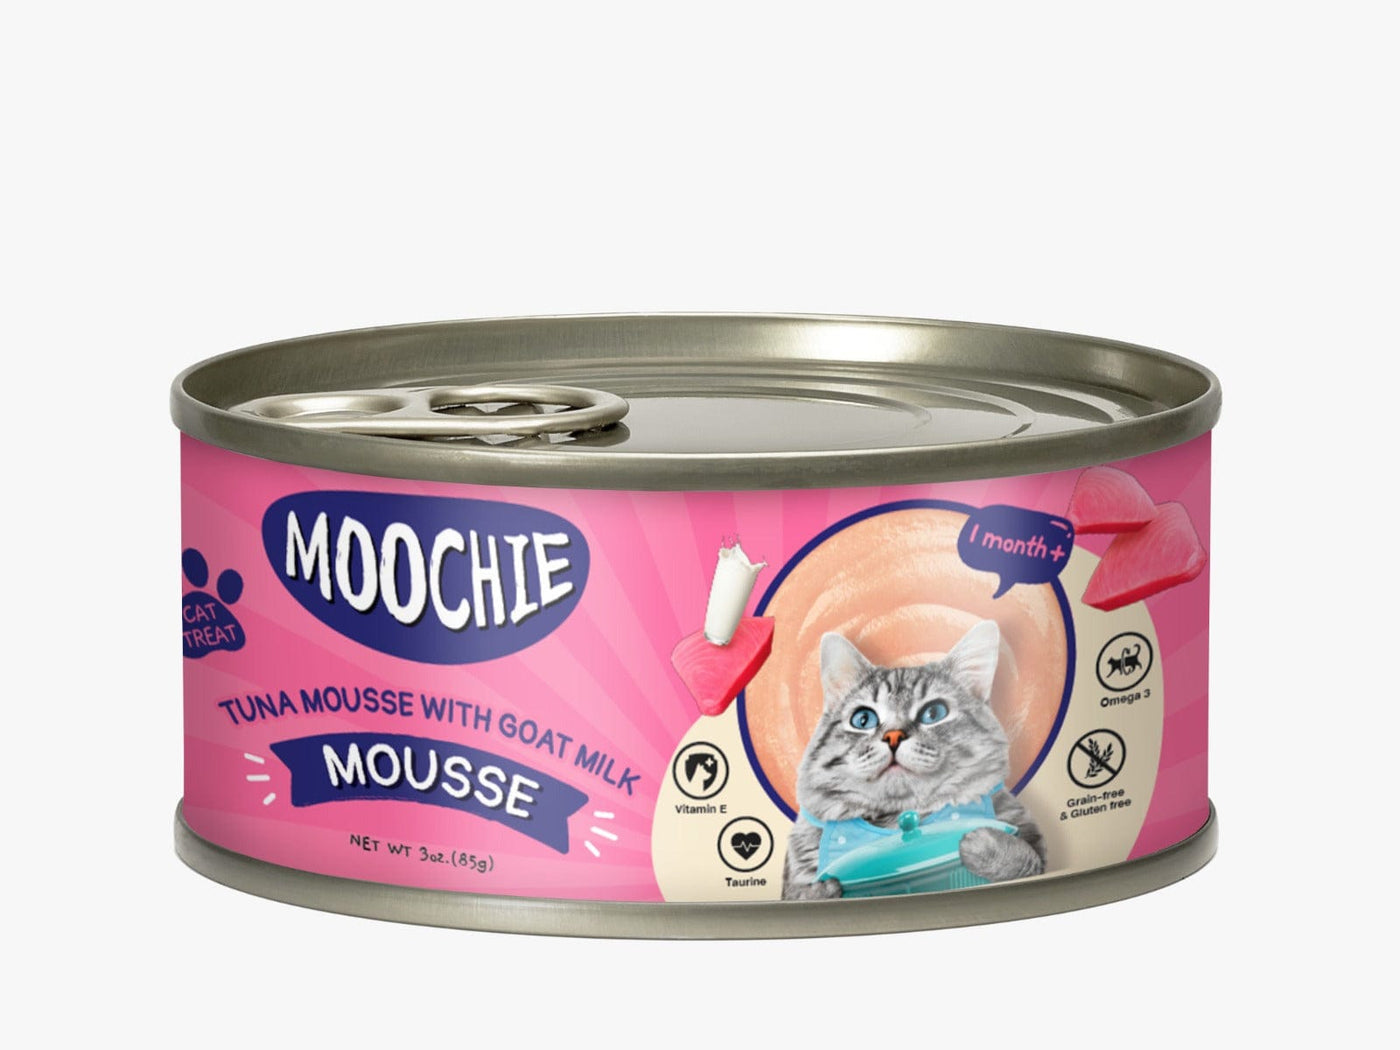 Moochie Tuna Mousse With Goatmilk Mousse 85G. Can